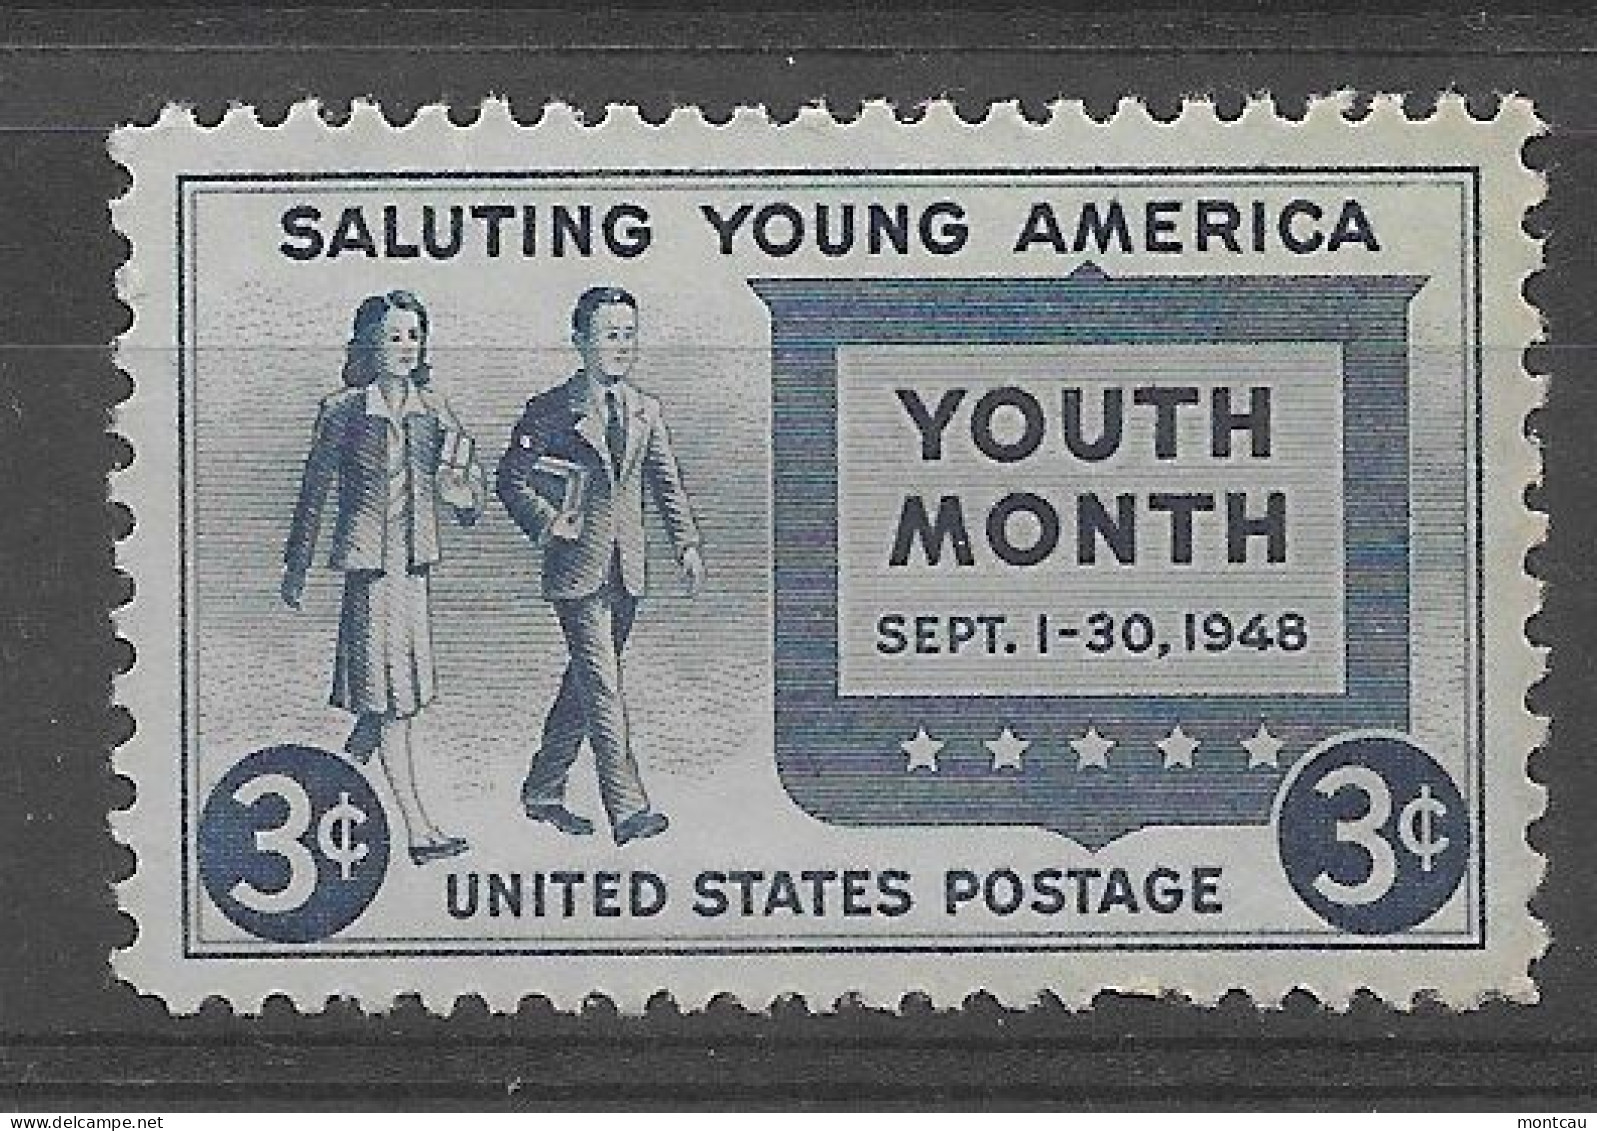 USA 1948.  Youth Month Sc 963  (**) - Neufs